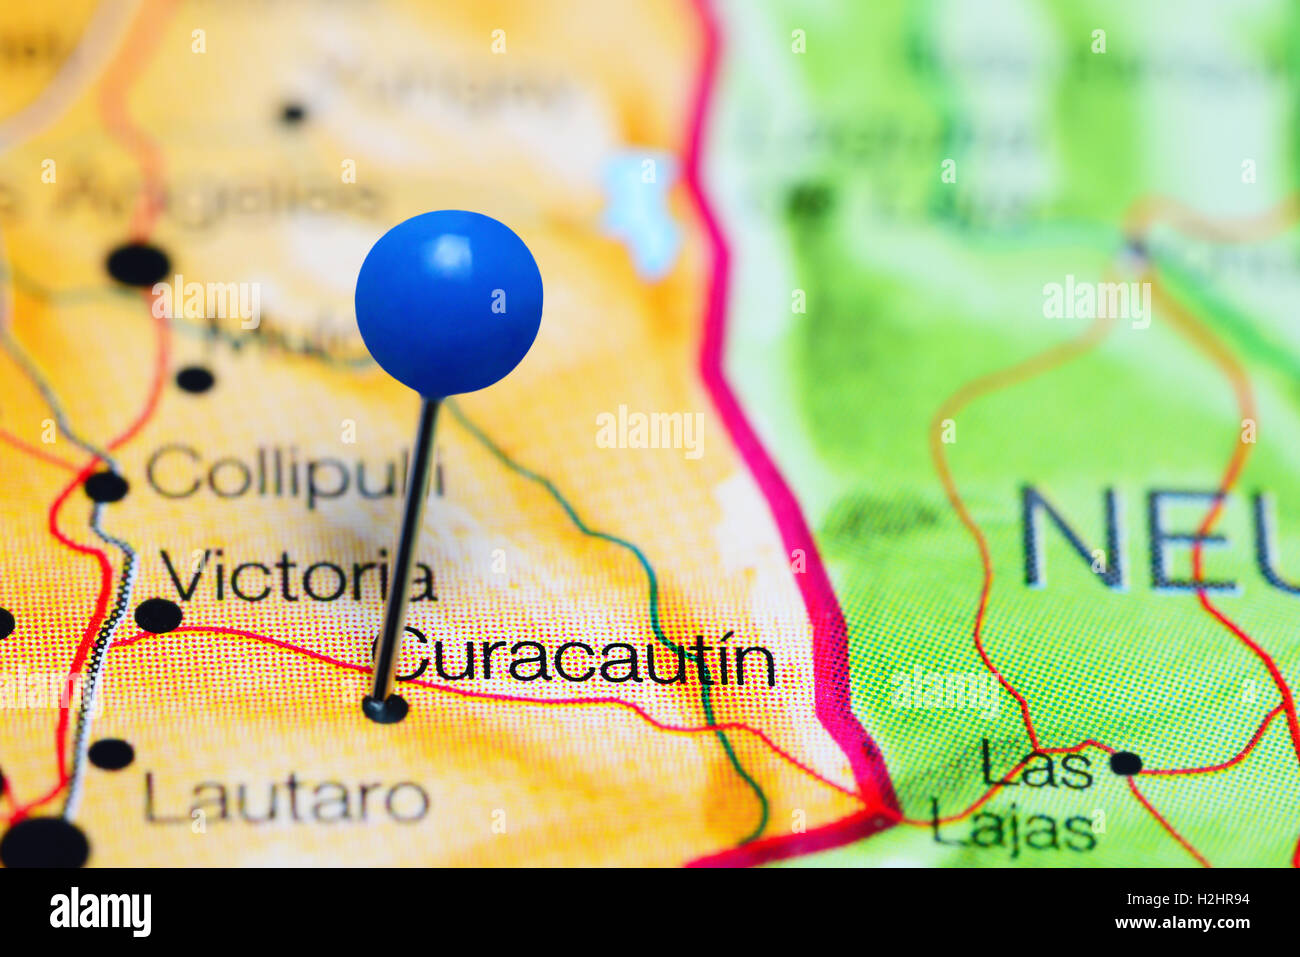 Curacautin pinned on a map of Chile Stock Photo